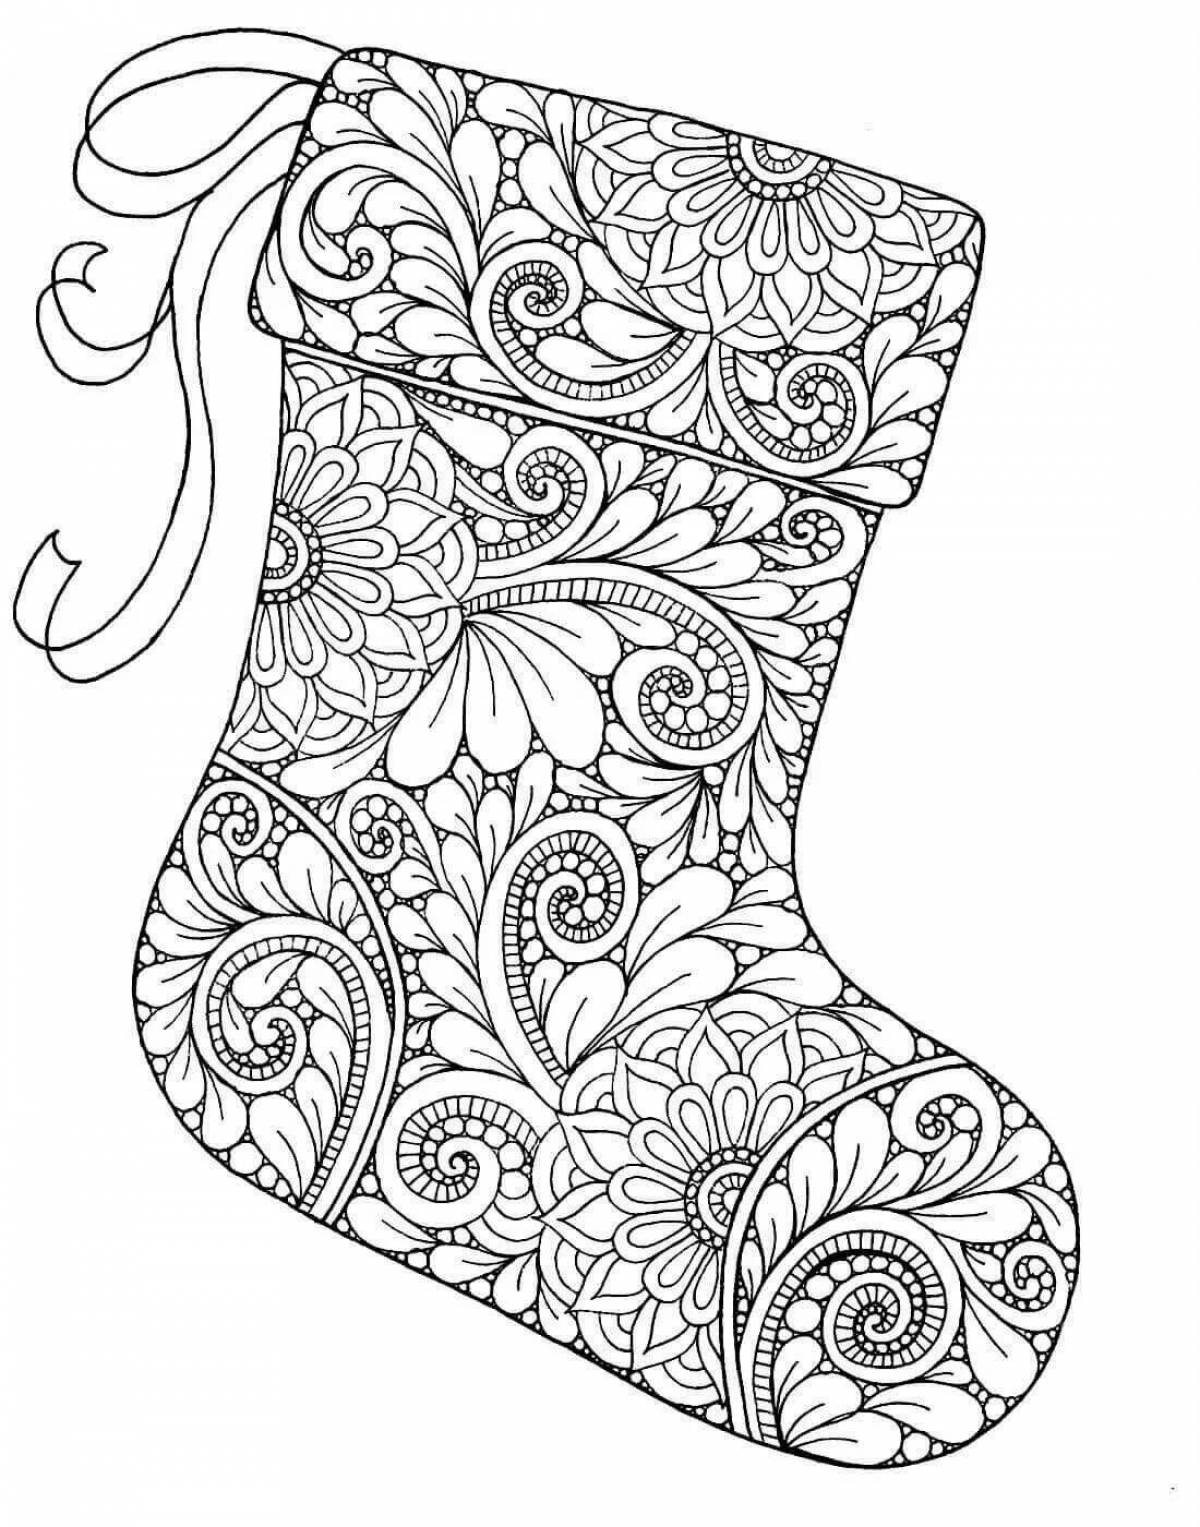 Merry Christmas anti-stress coloring book